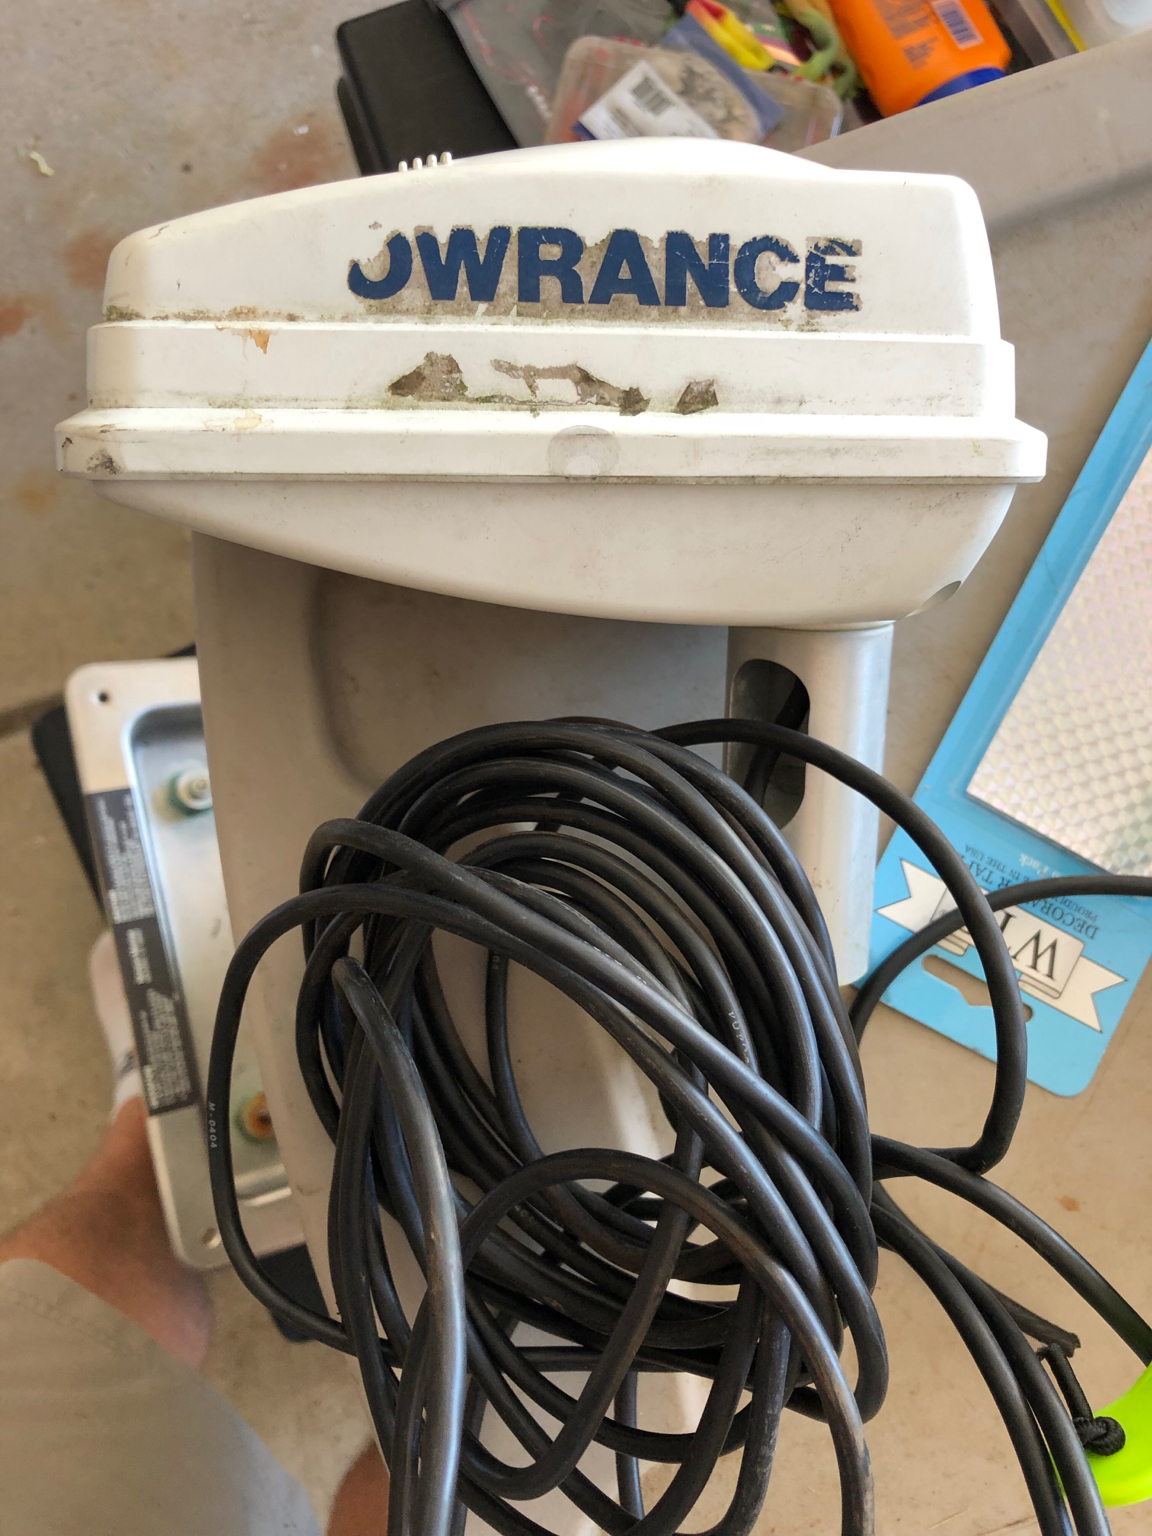 Ensomhed Lår Med andre band Lowrance GPS Antenna - $25 - Classifieds - Buy, Sell, Trade or Rent - Lake  Erie United - Walleye, Bass, Perch Fishing Forum